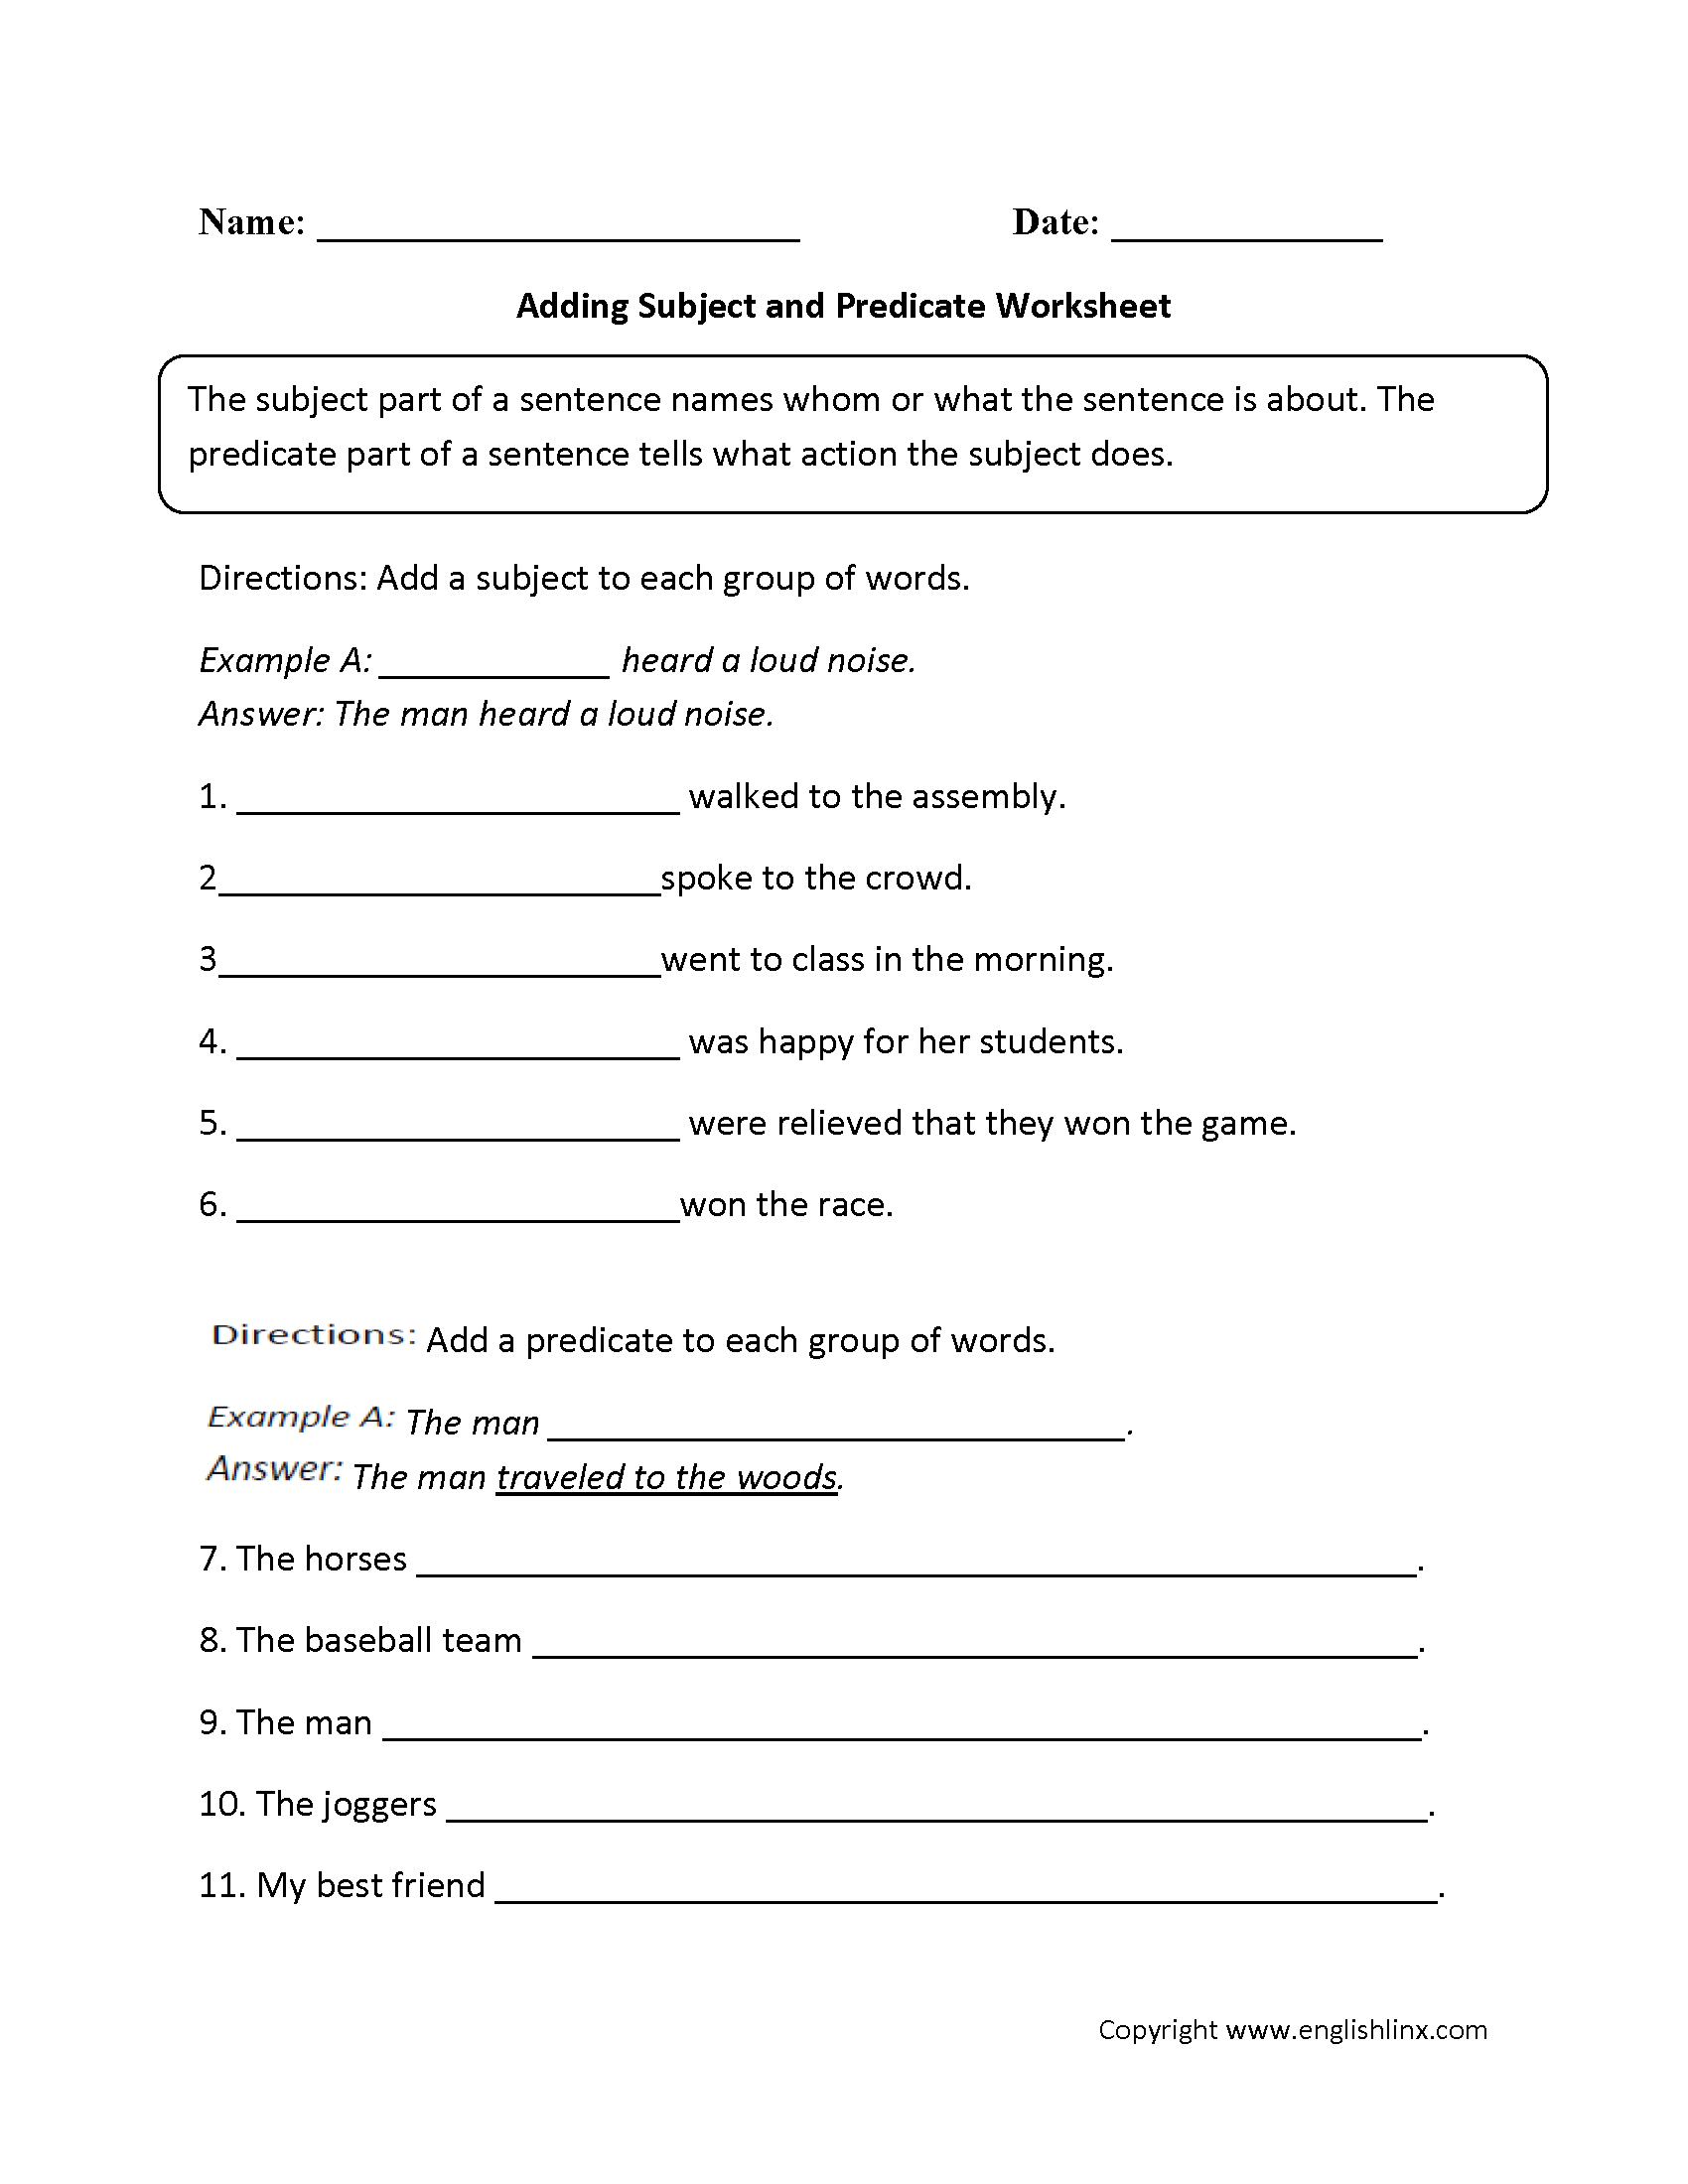 13 Best Images of English 9th Grade Vocabulary Worksheets - 9th Grade